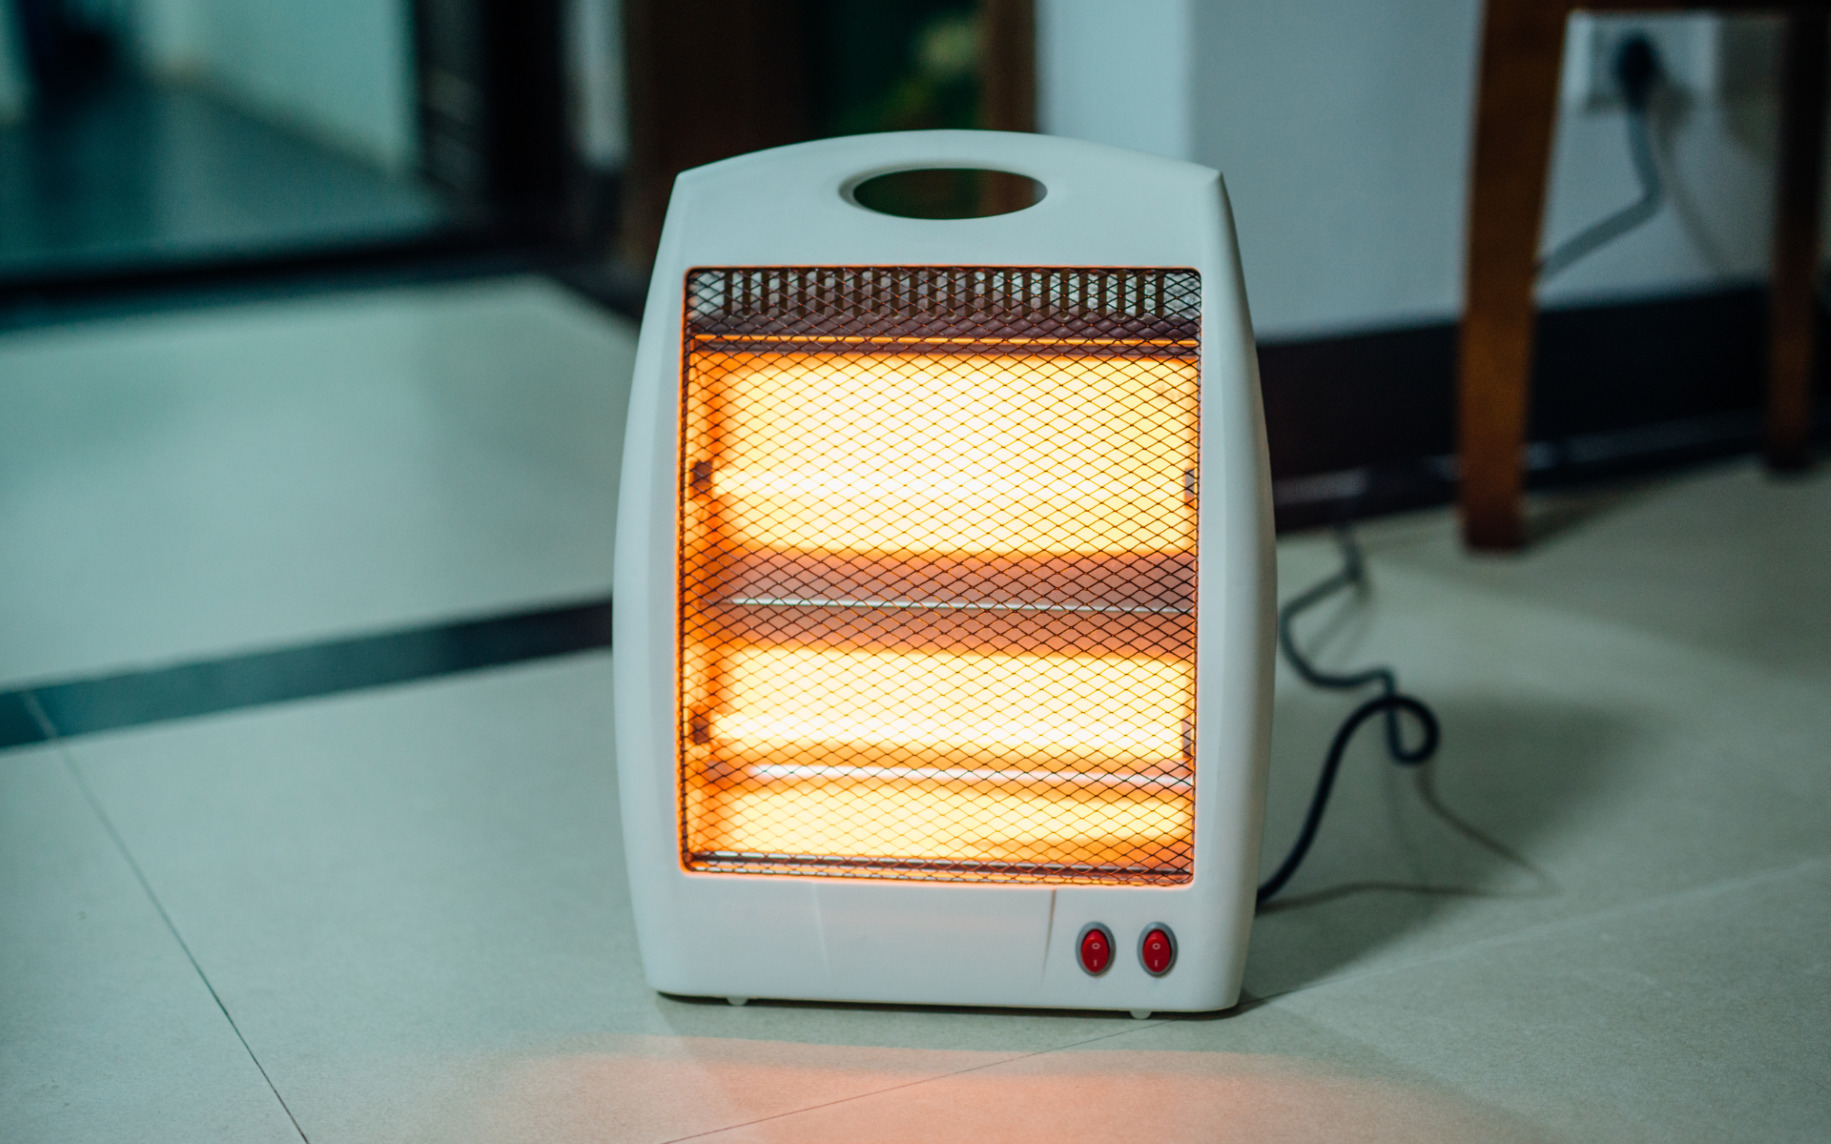 View of a space heater representing the need for electrical safety and proper residential electric services